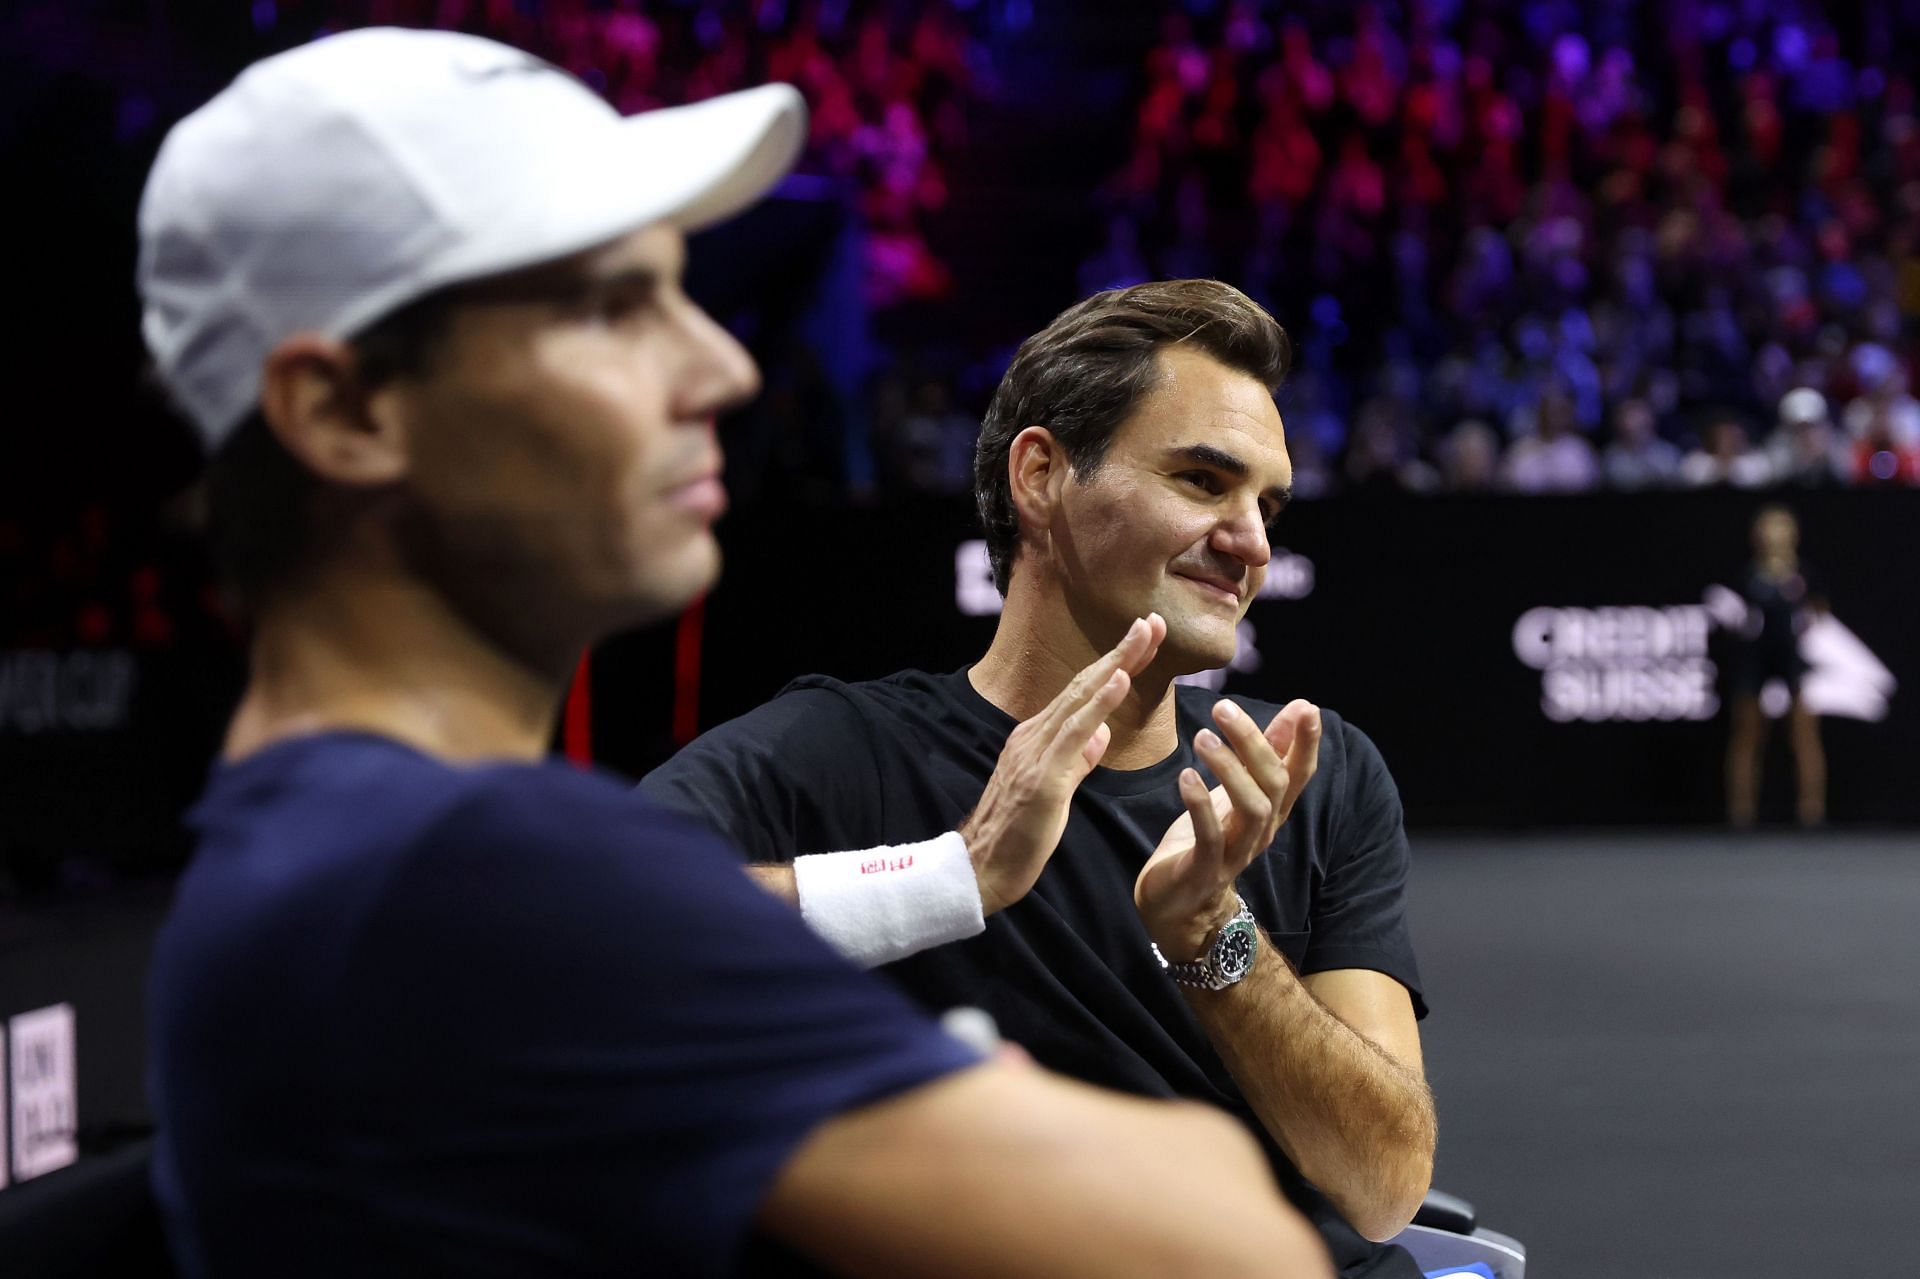 Roger Federer alongside Rafael Nadal during a practice session ahead of the 2022 Laver Cup.